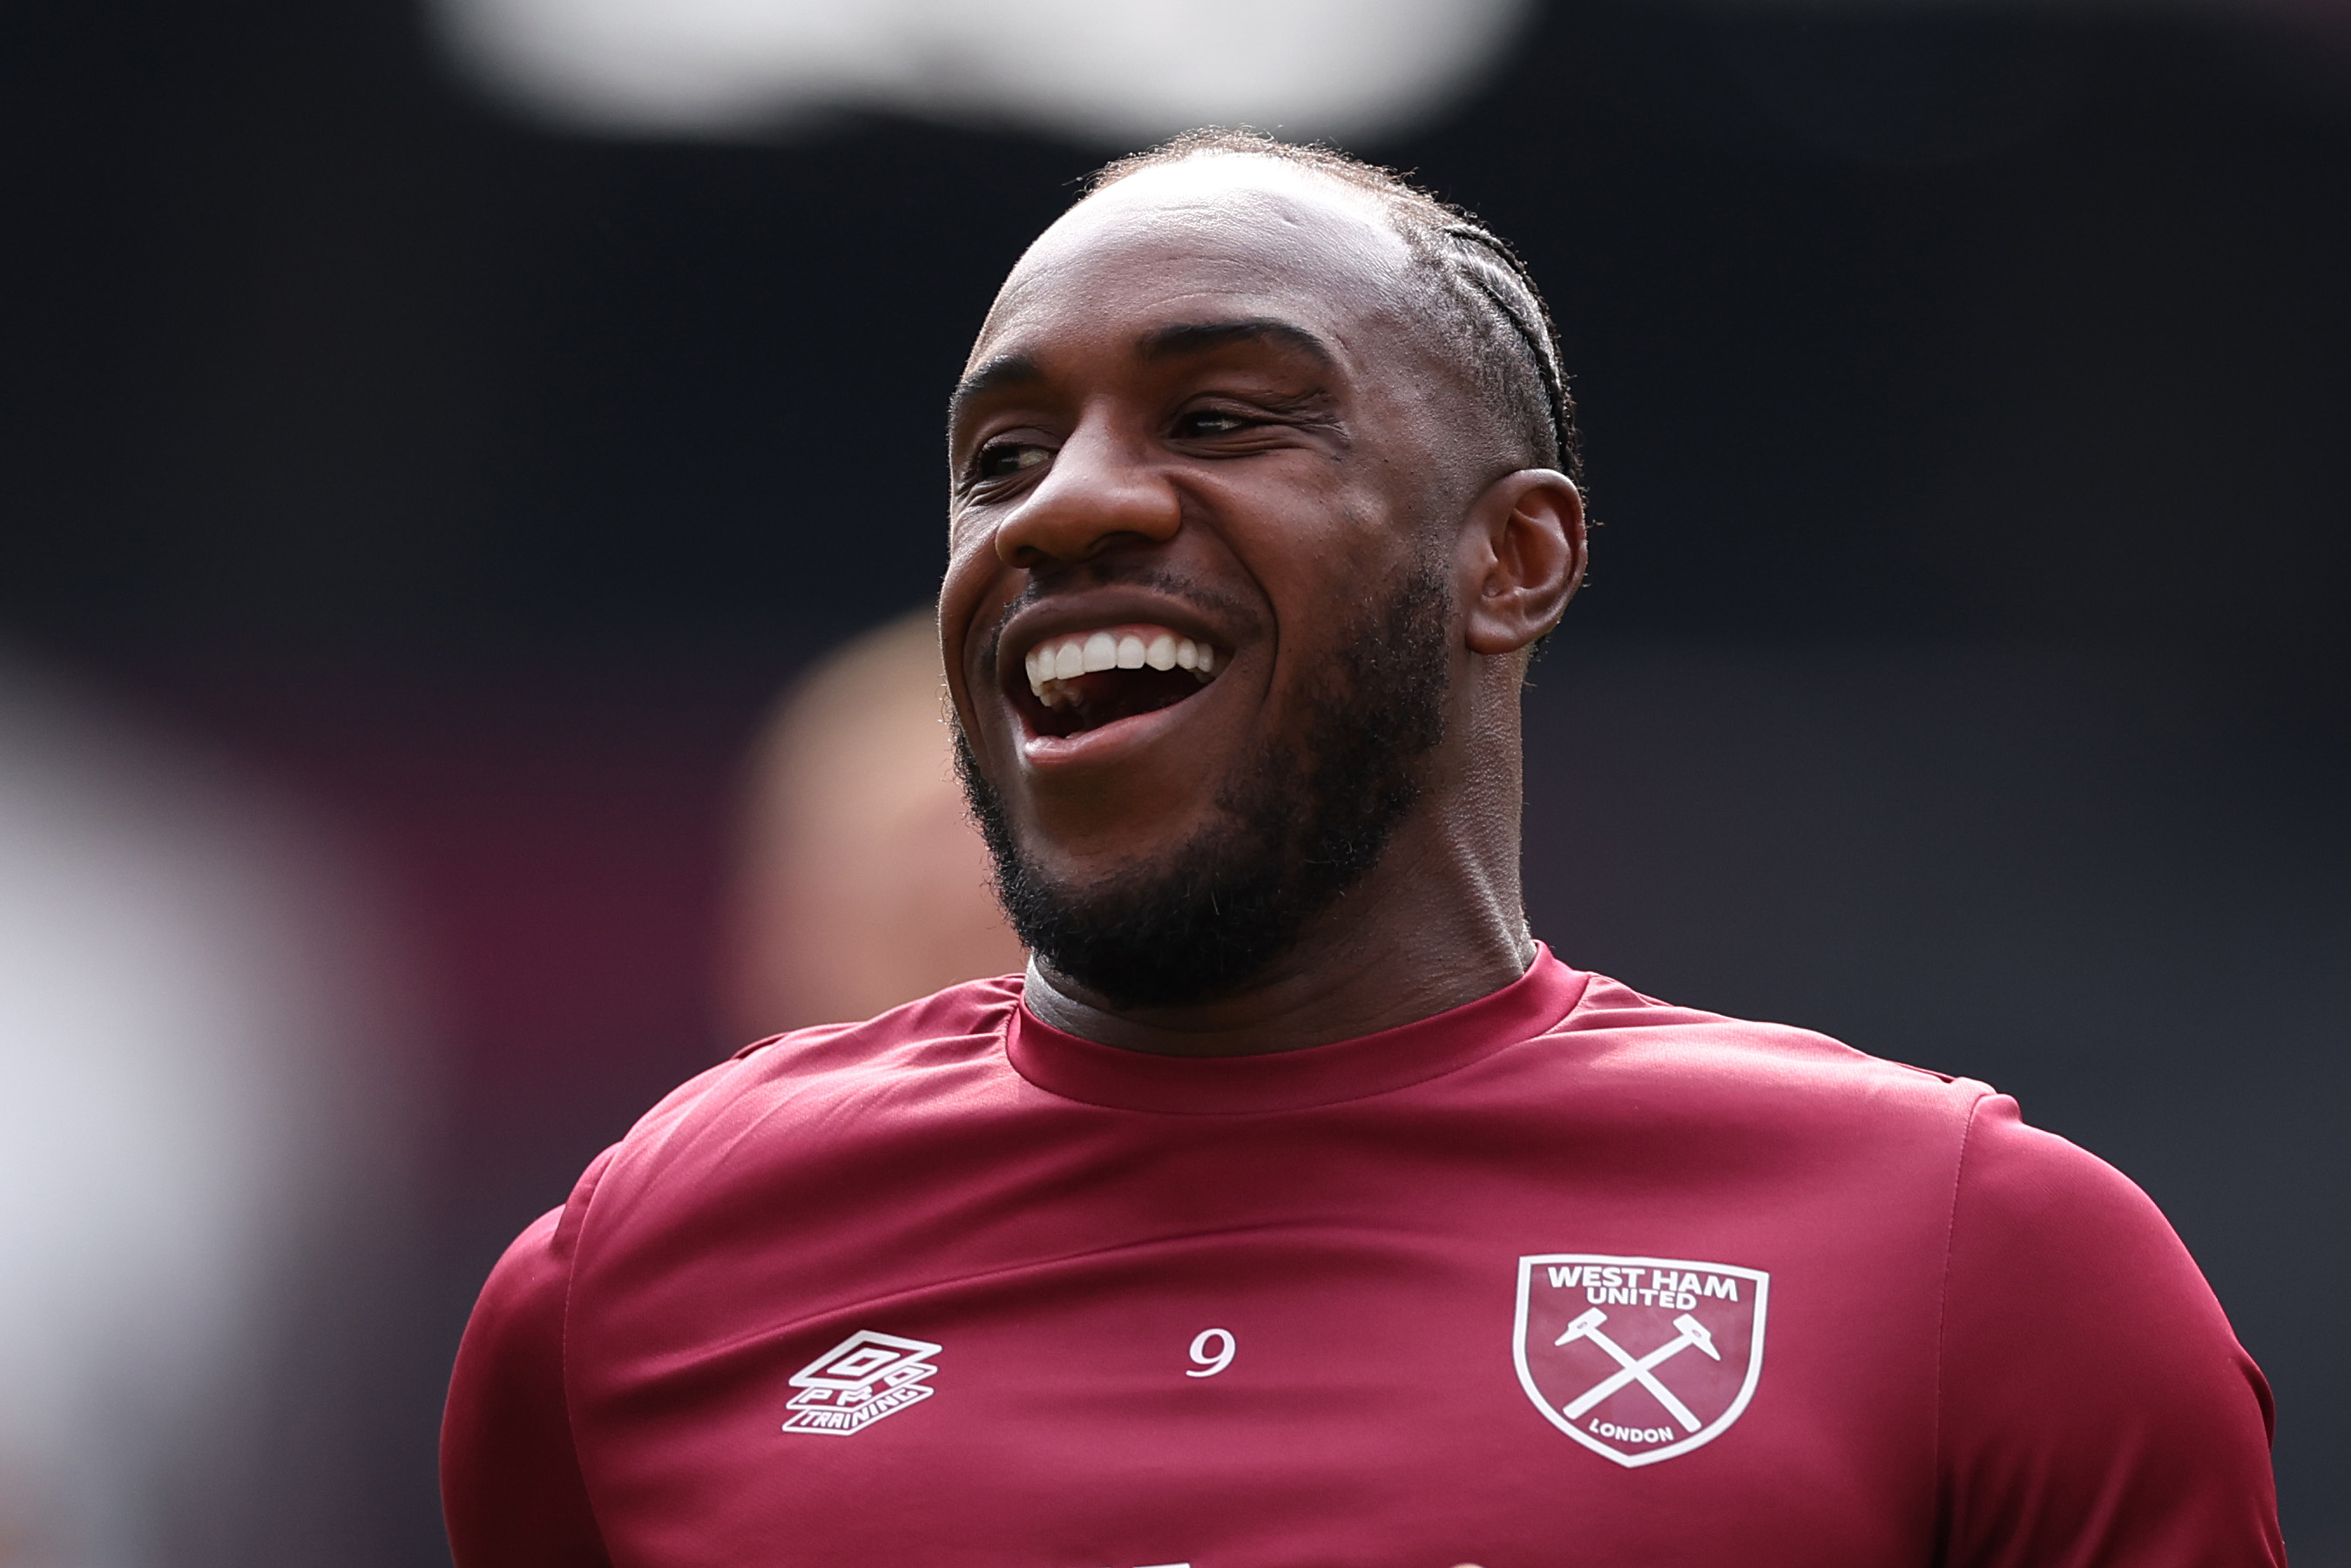 Antonio could be set for an awkward encounter with Salah this weekend